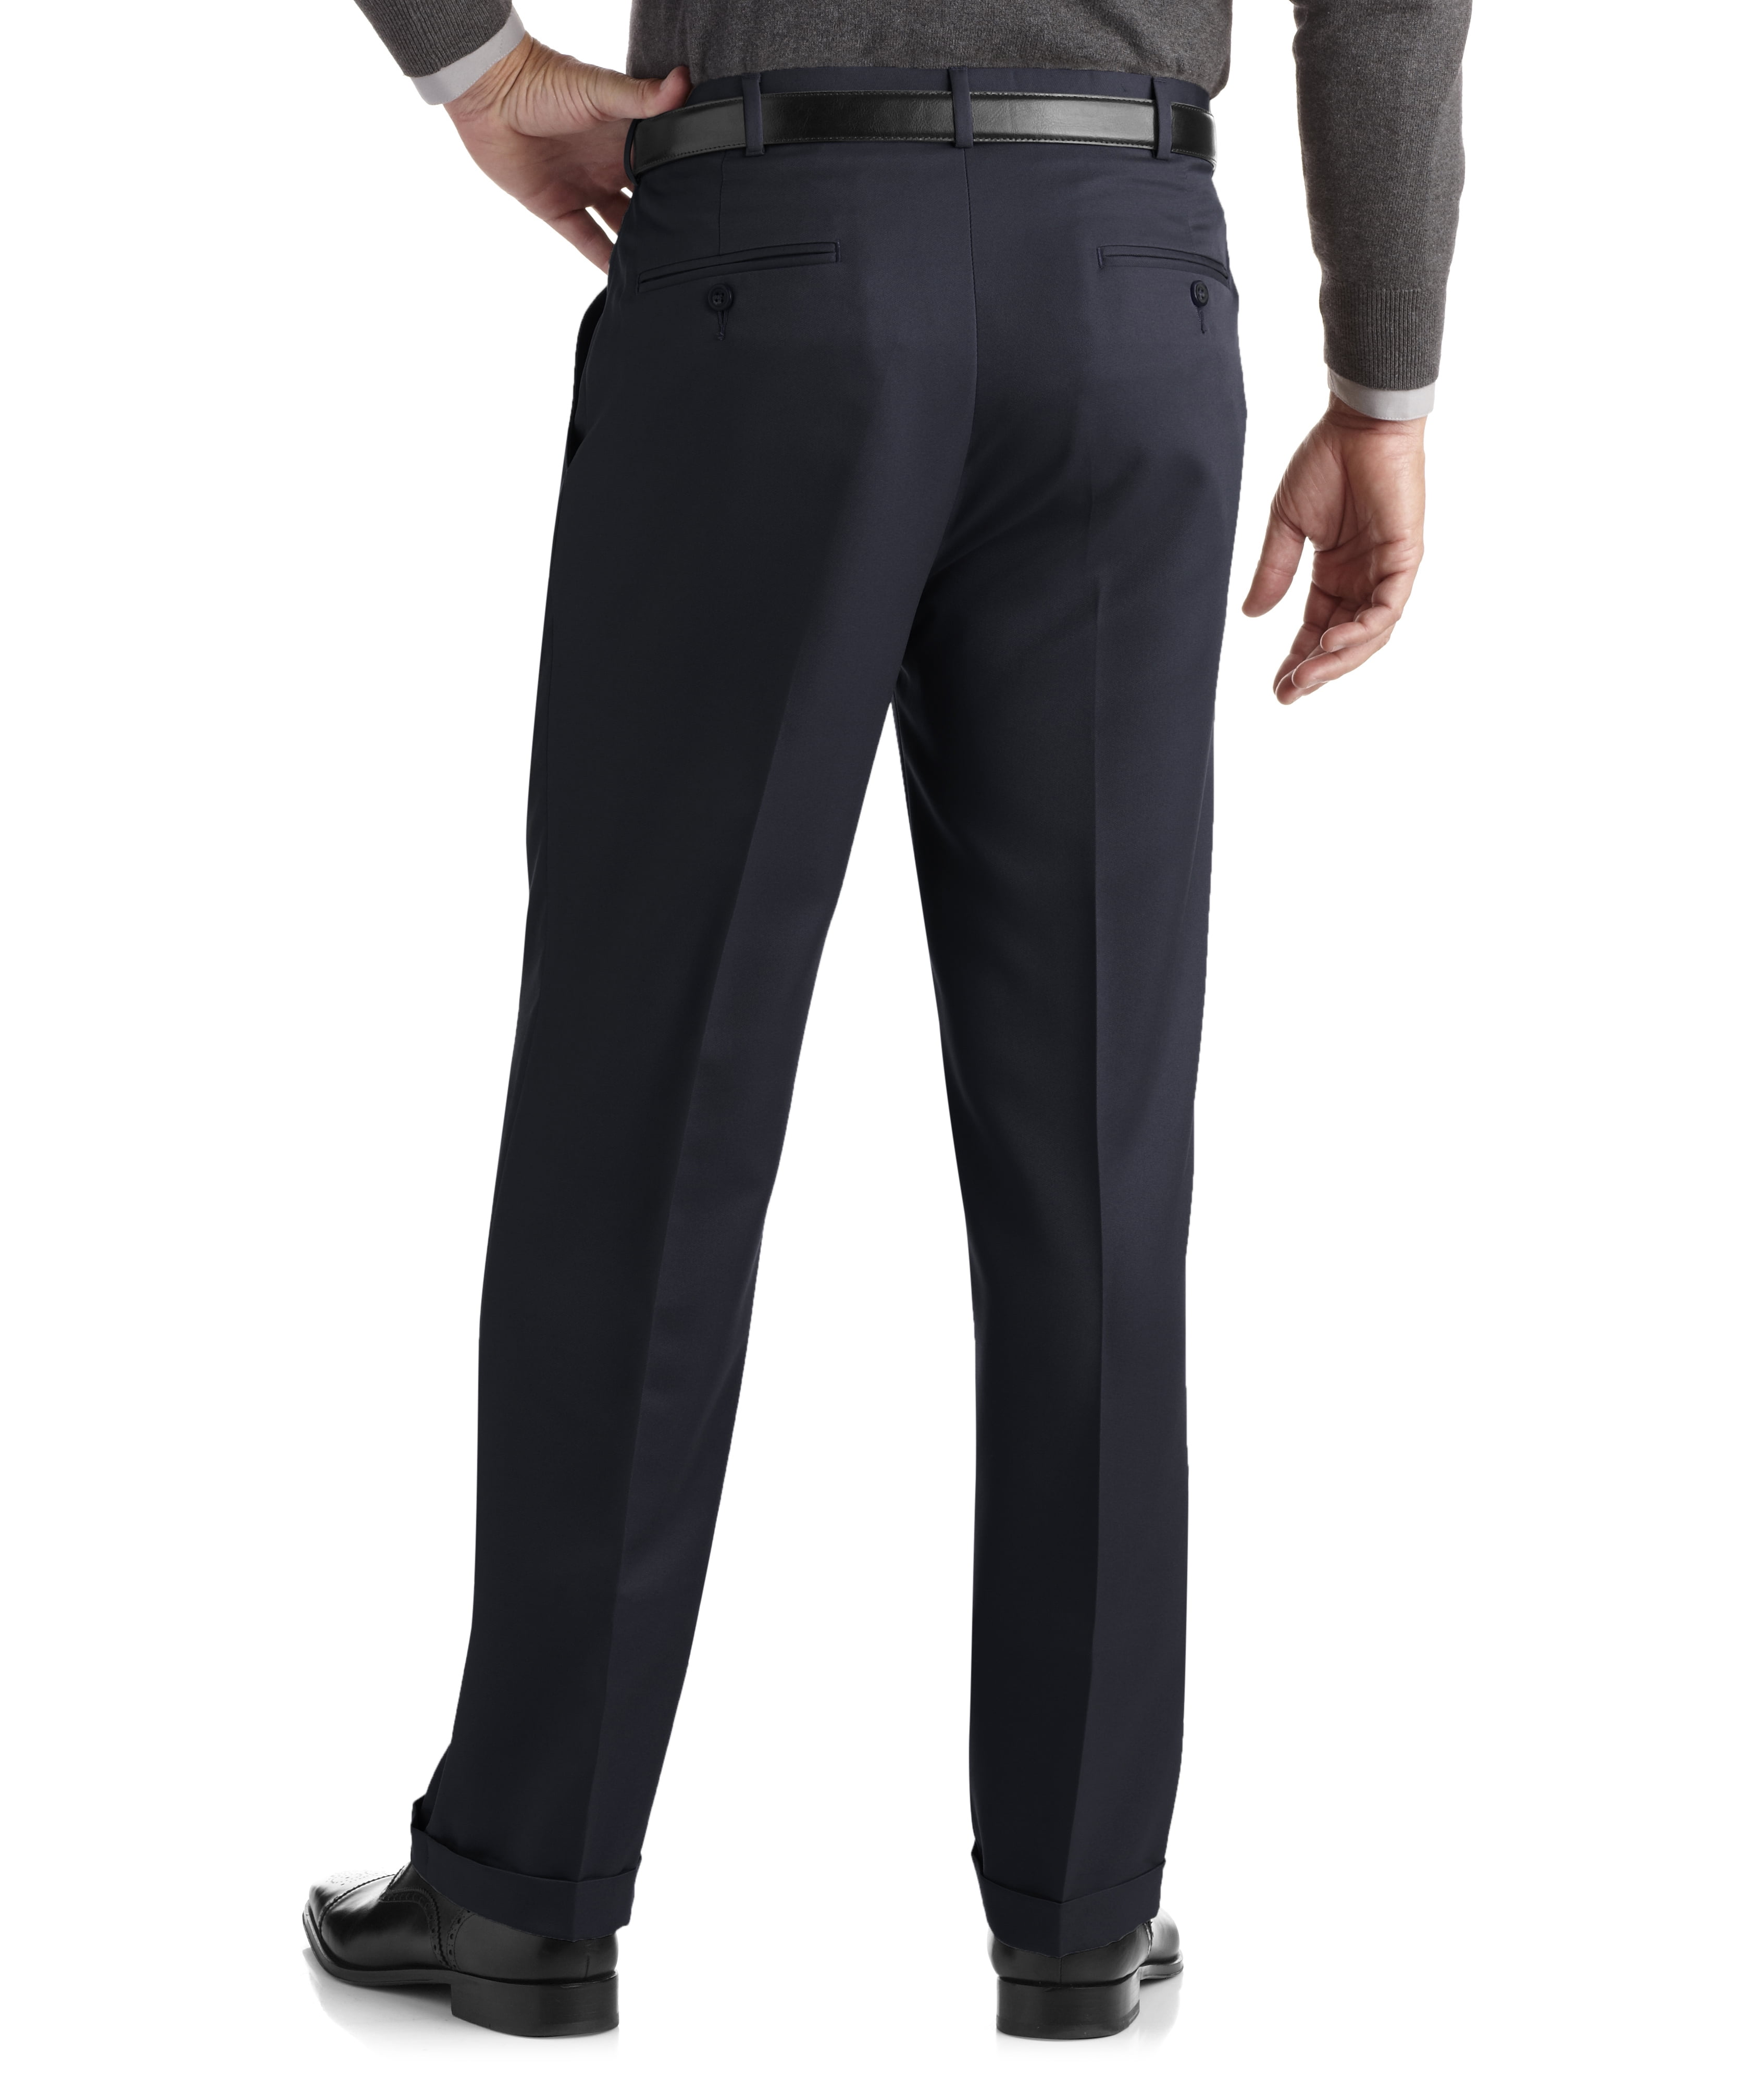 Reviewers Say These Men's Dress Pants Feel Like Sweats | HuffPost Life